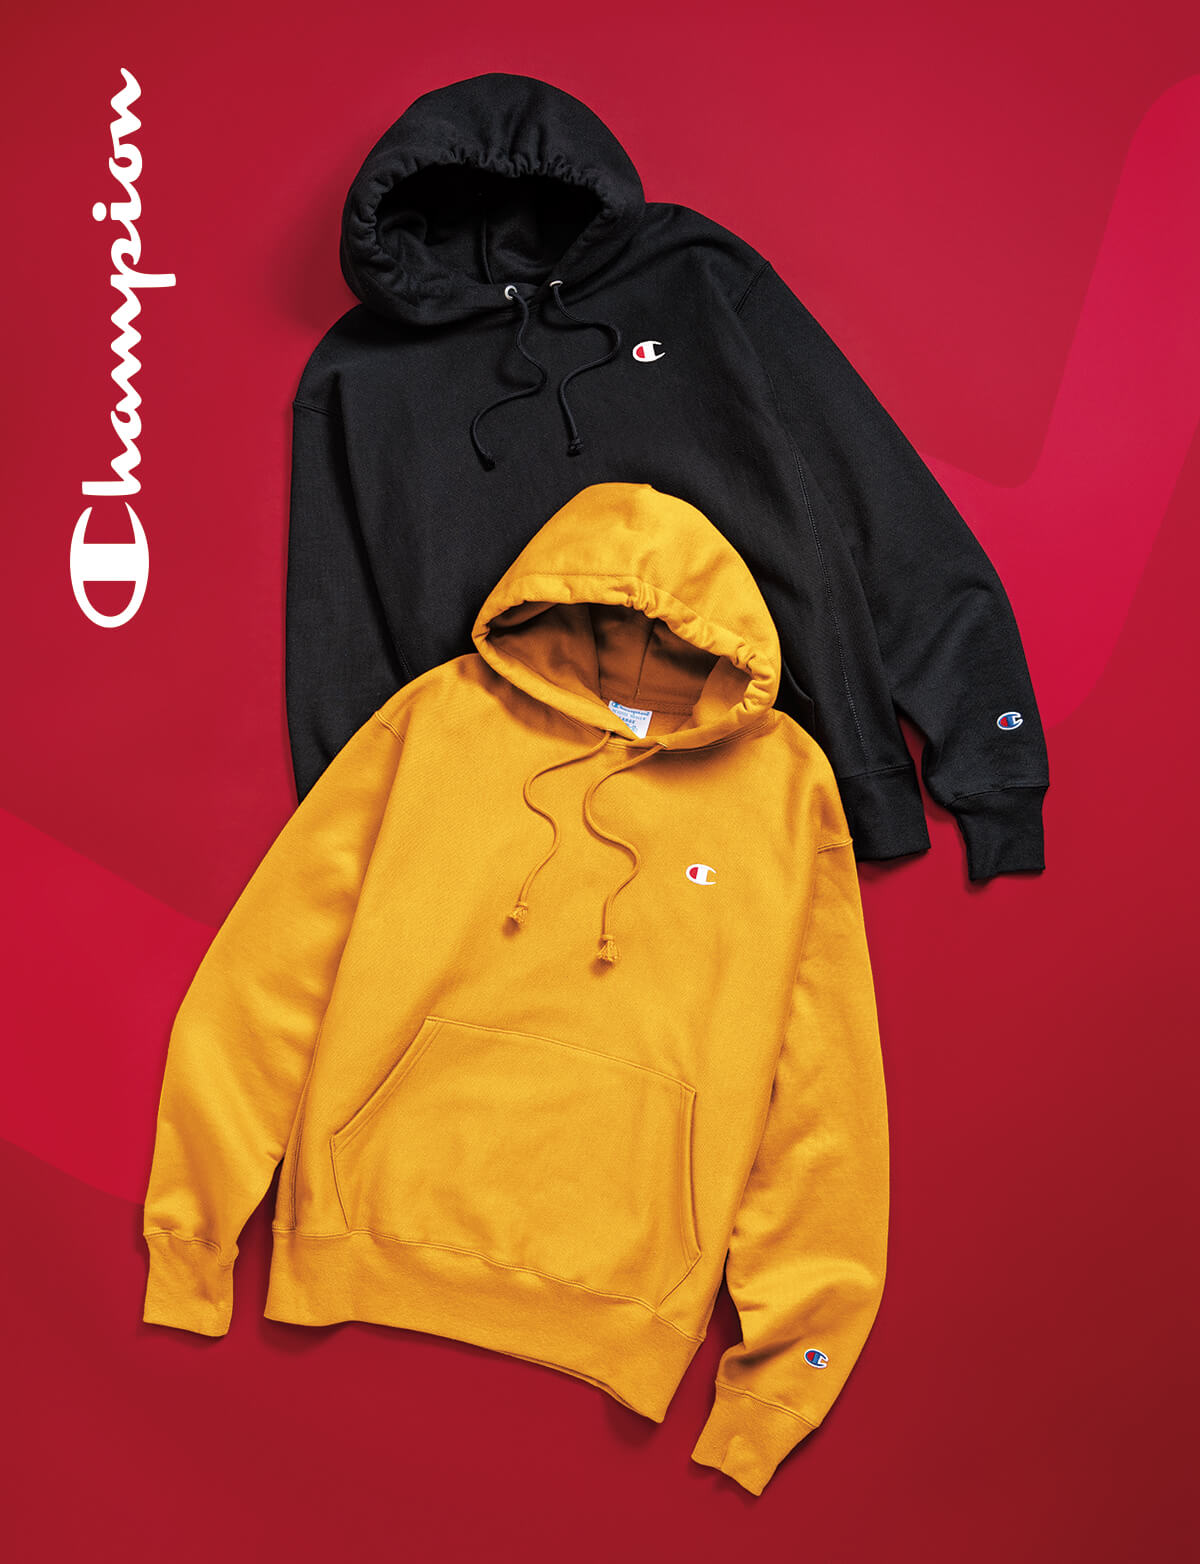 NEW ARRIVAL HOODIES FROM CHAMPION - SHOP CHAMPION